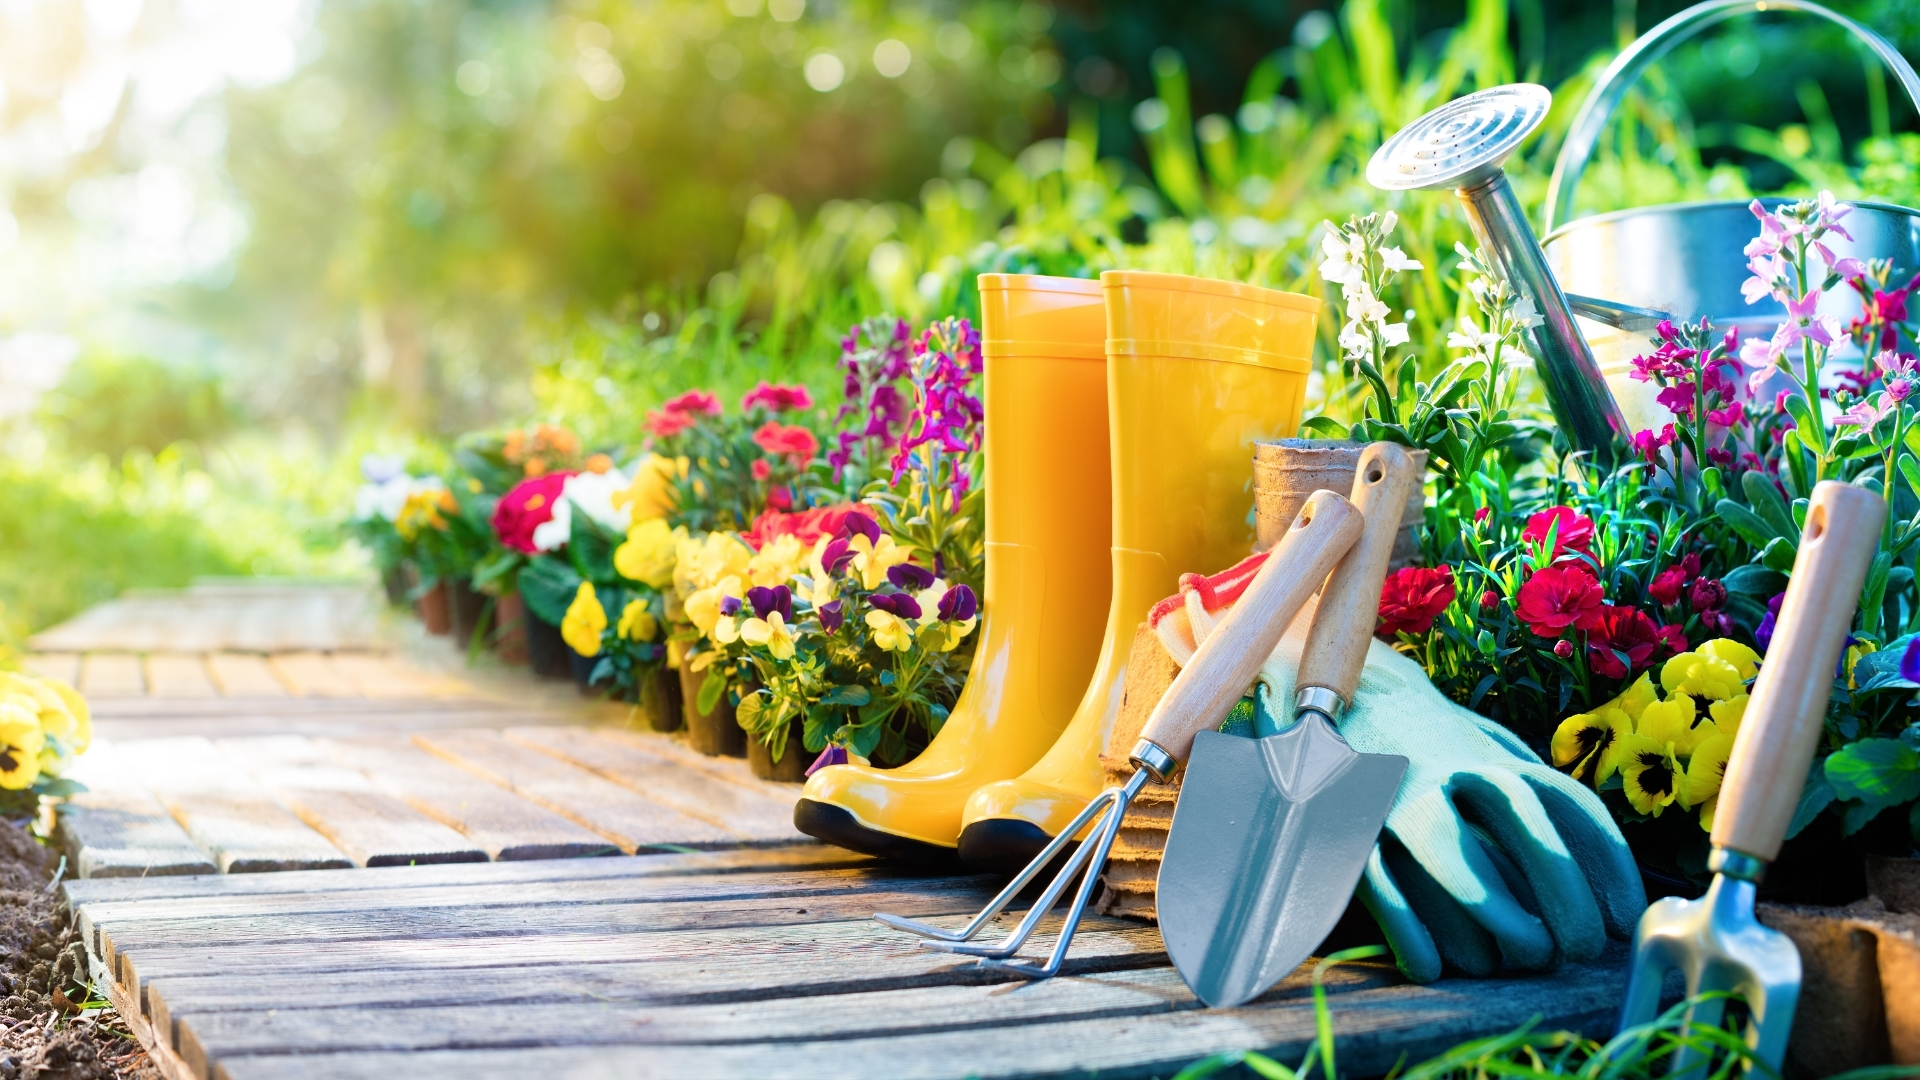 photo of gardening tools and yellow boots on a wooden path with flowers along side it.